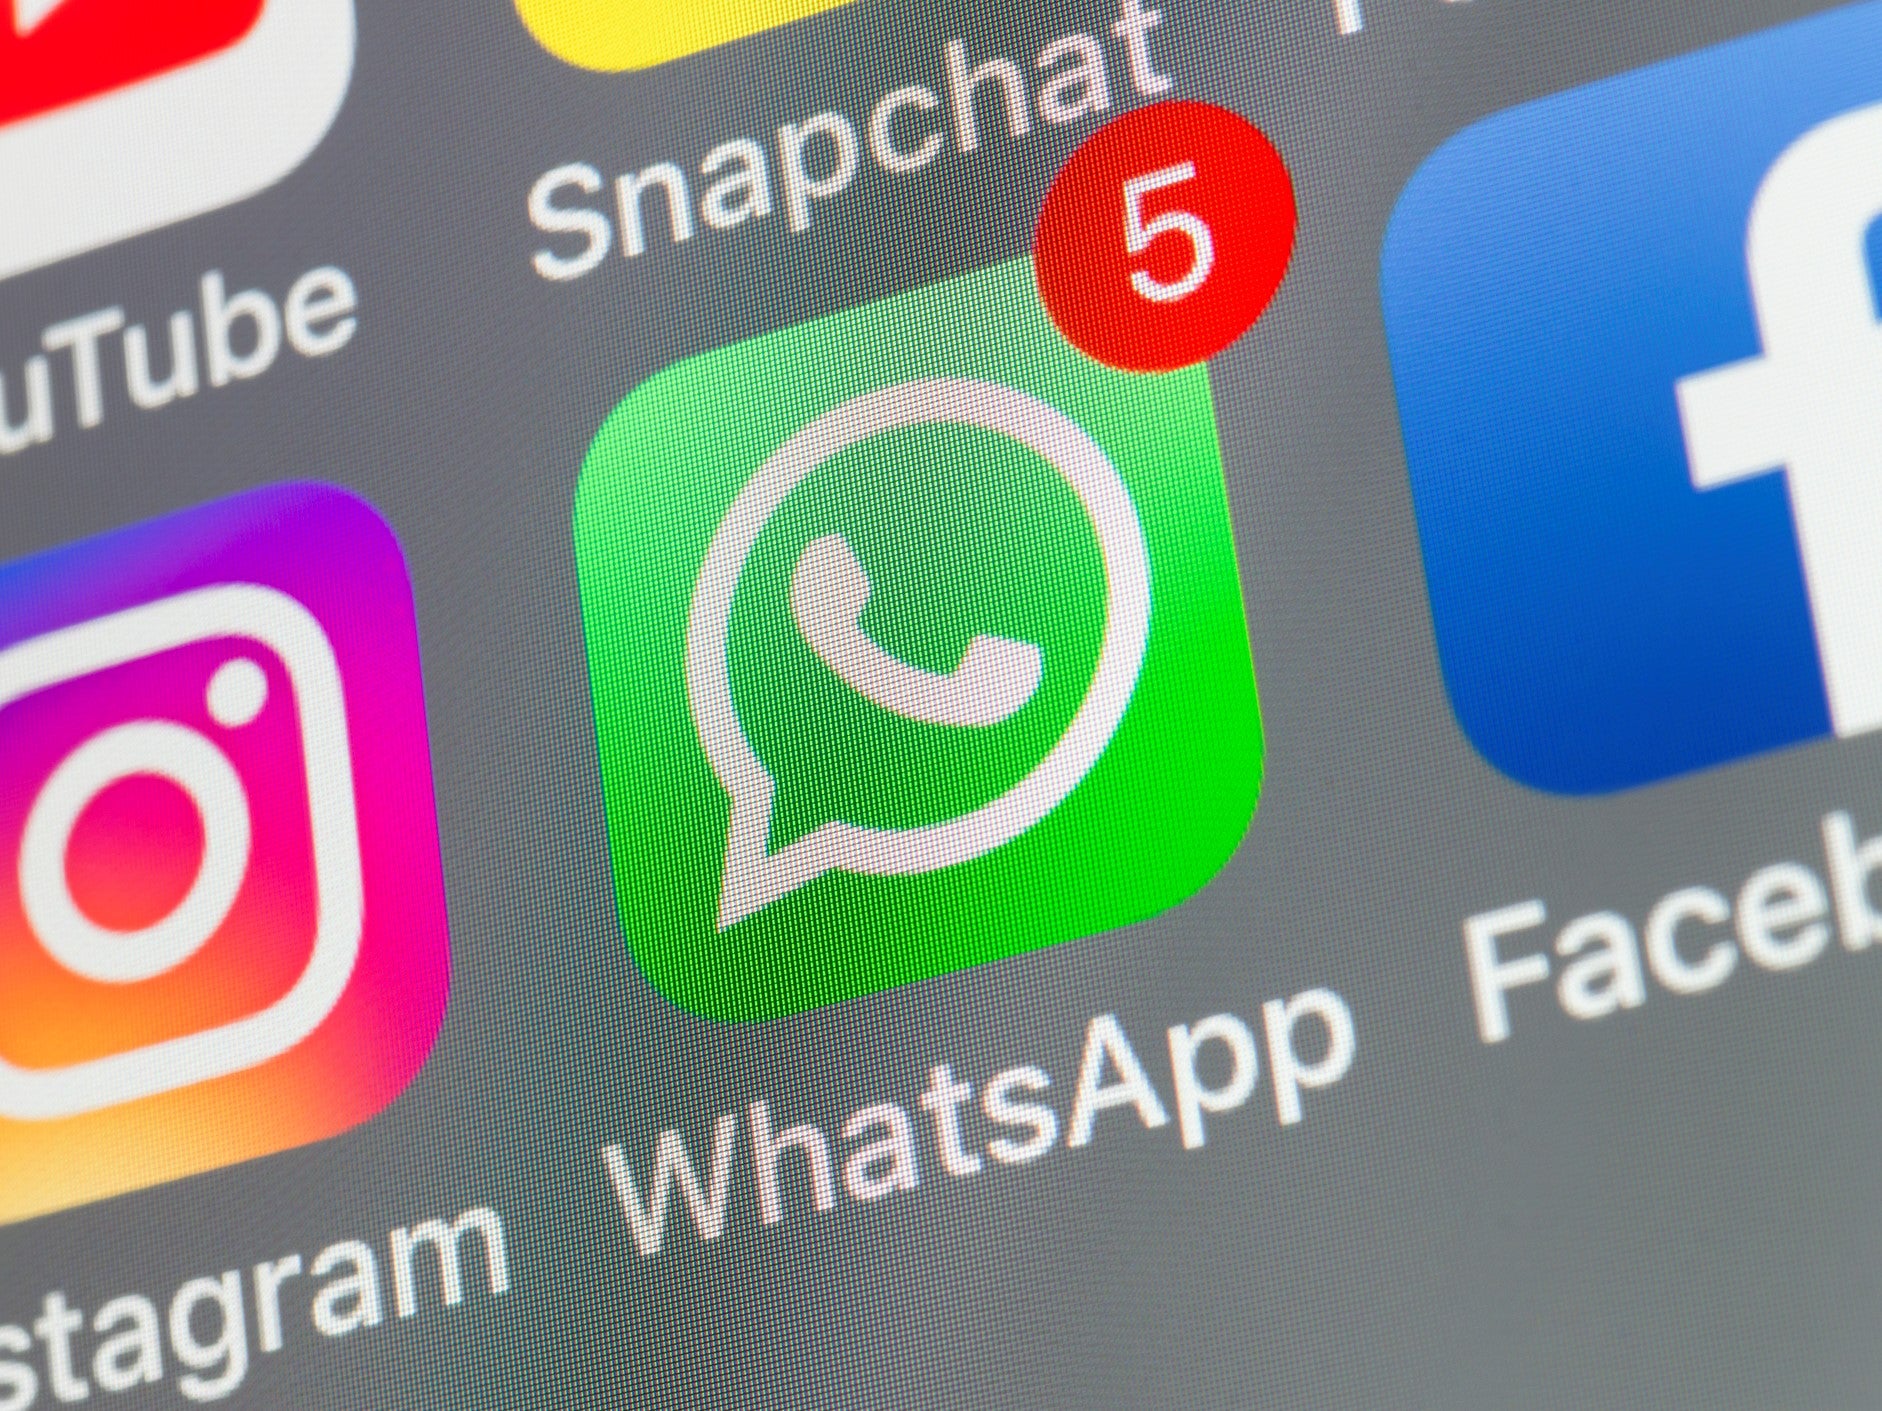 Facebook, Instagram and WhatsApp were all down on Friday, 19 March, 2021